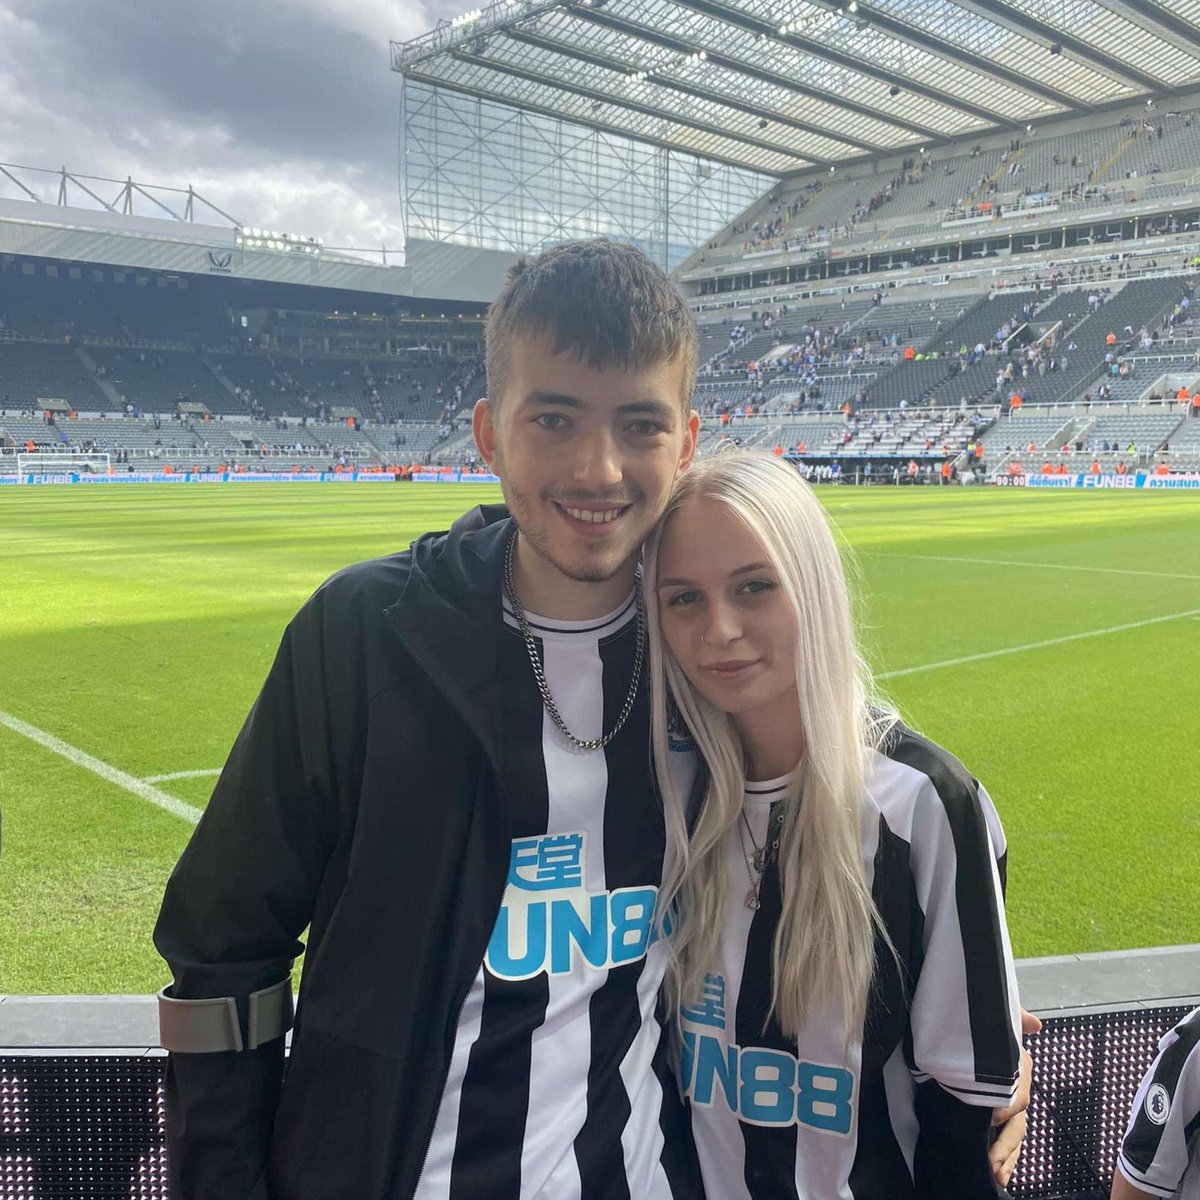 We are devastated to hear about the passing of Kai Heslop following a battle with cancer. Our thoughts and prayers are with Kai’s family and friends at this heartbreaking time. RIP Kai 🖤🤍 #NUFC